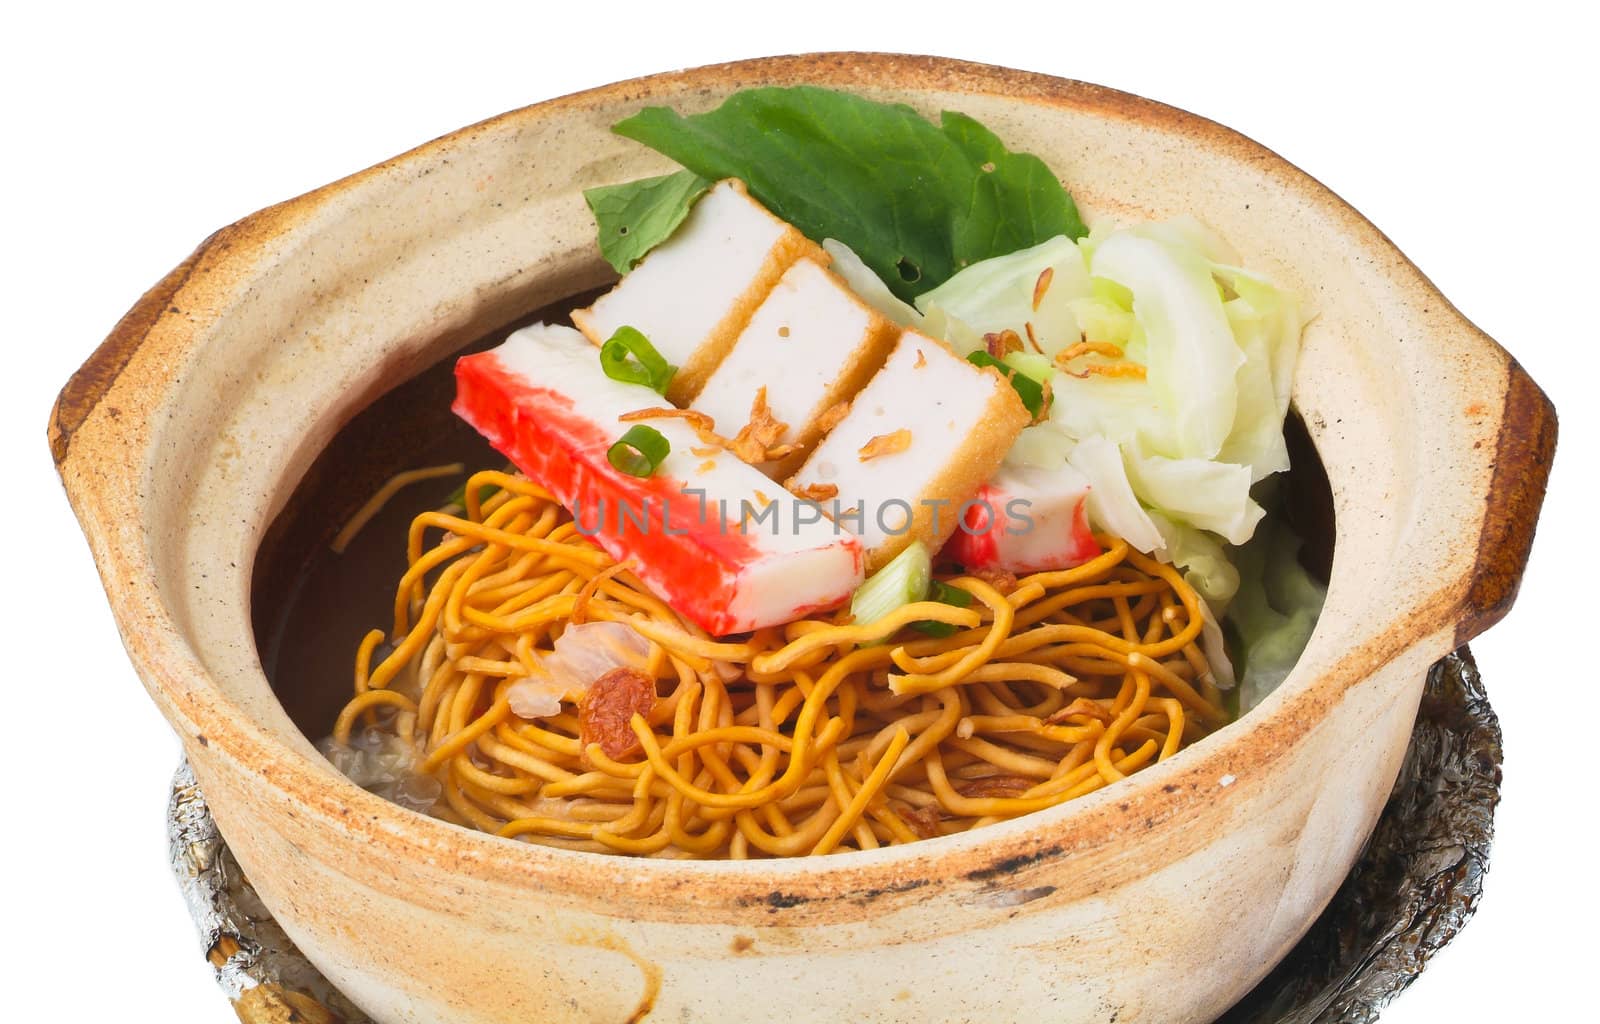 Claypo noodles. the asia food